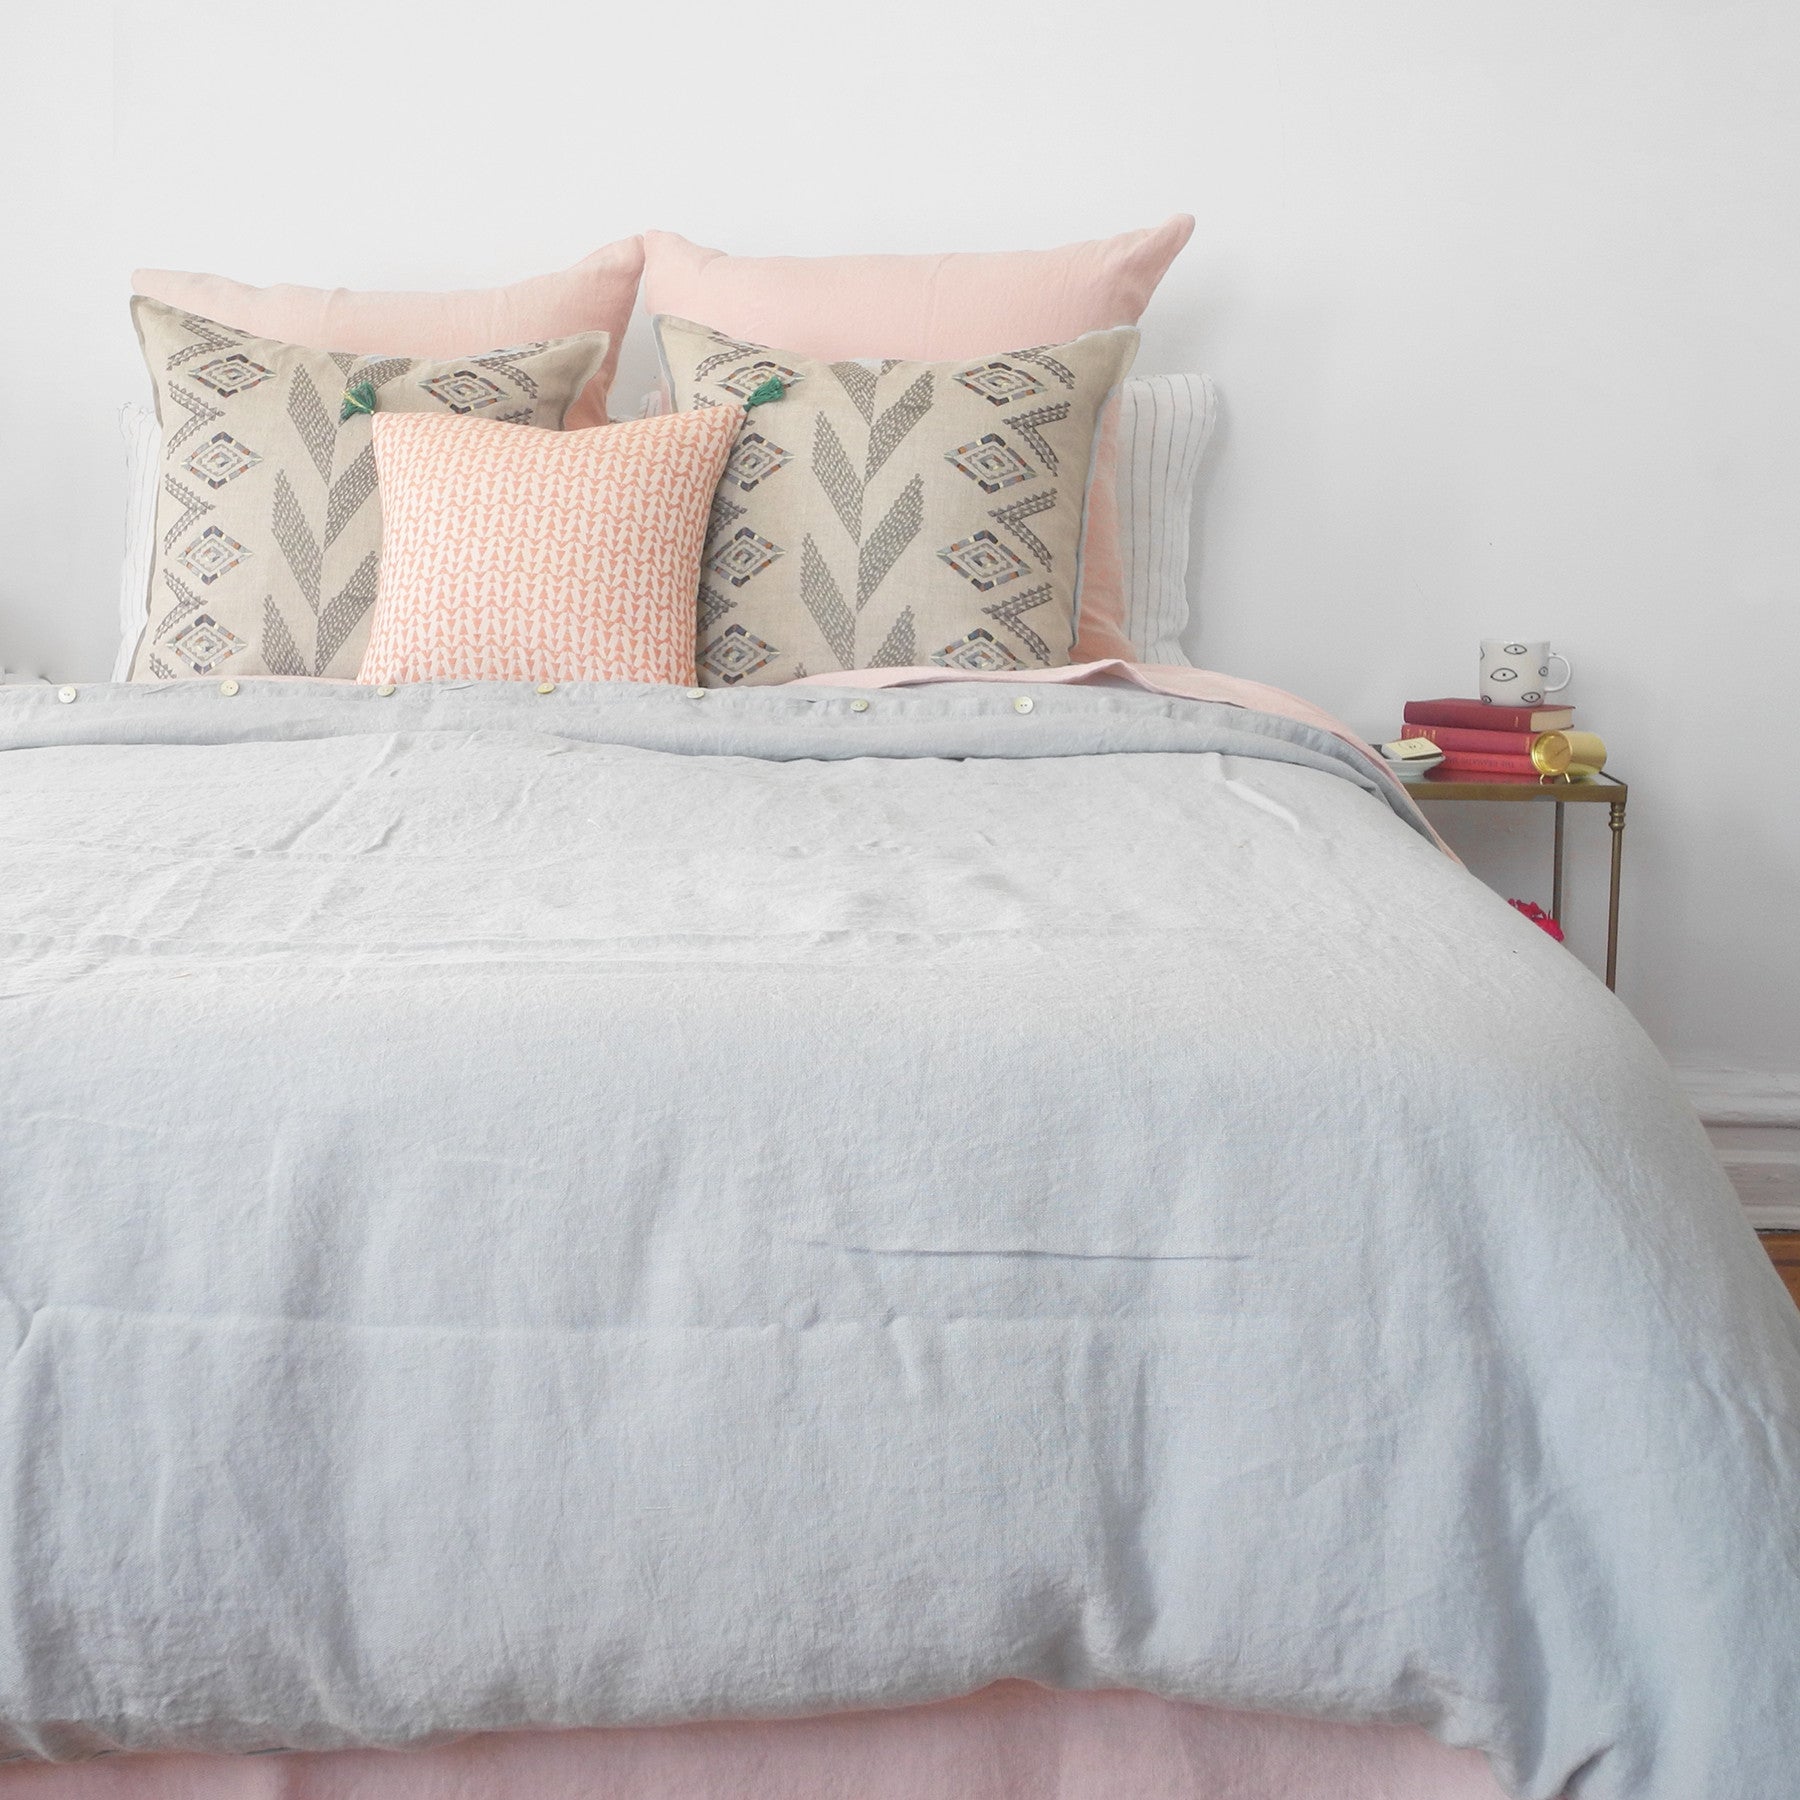 A Linge Particulier Linen Duvet in Cloud Grey gives a gray and dove grey color to this duvet for a colorful linen bedding look from Collyer&#39;s Mansion